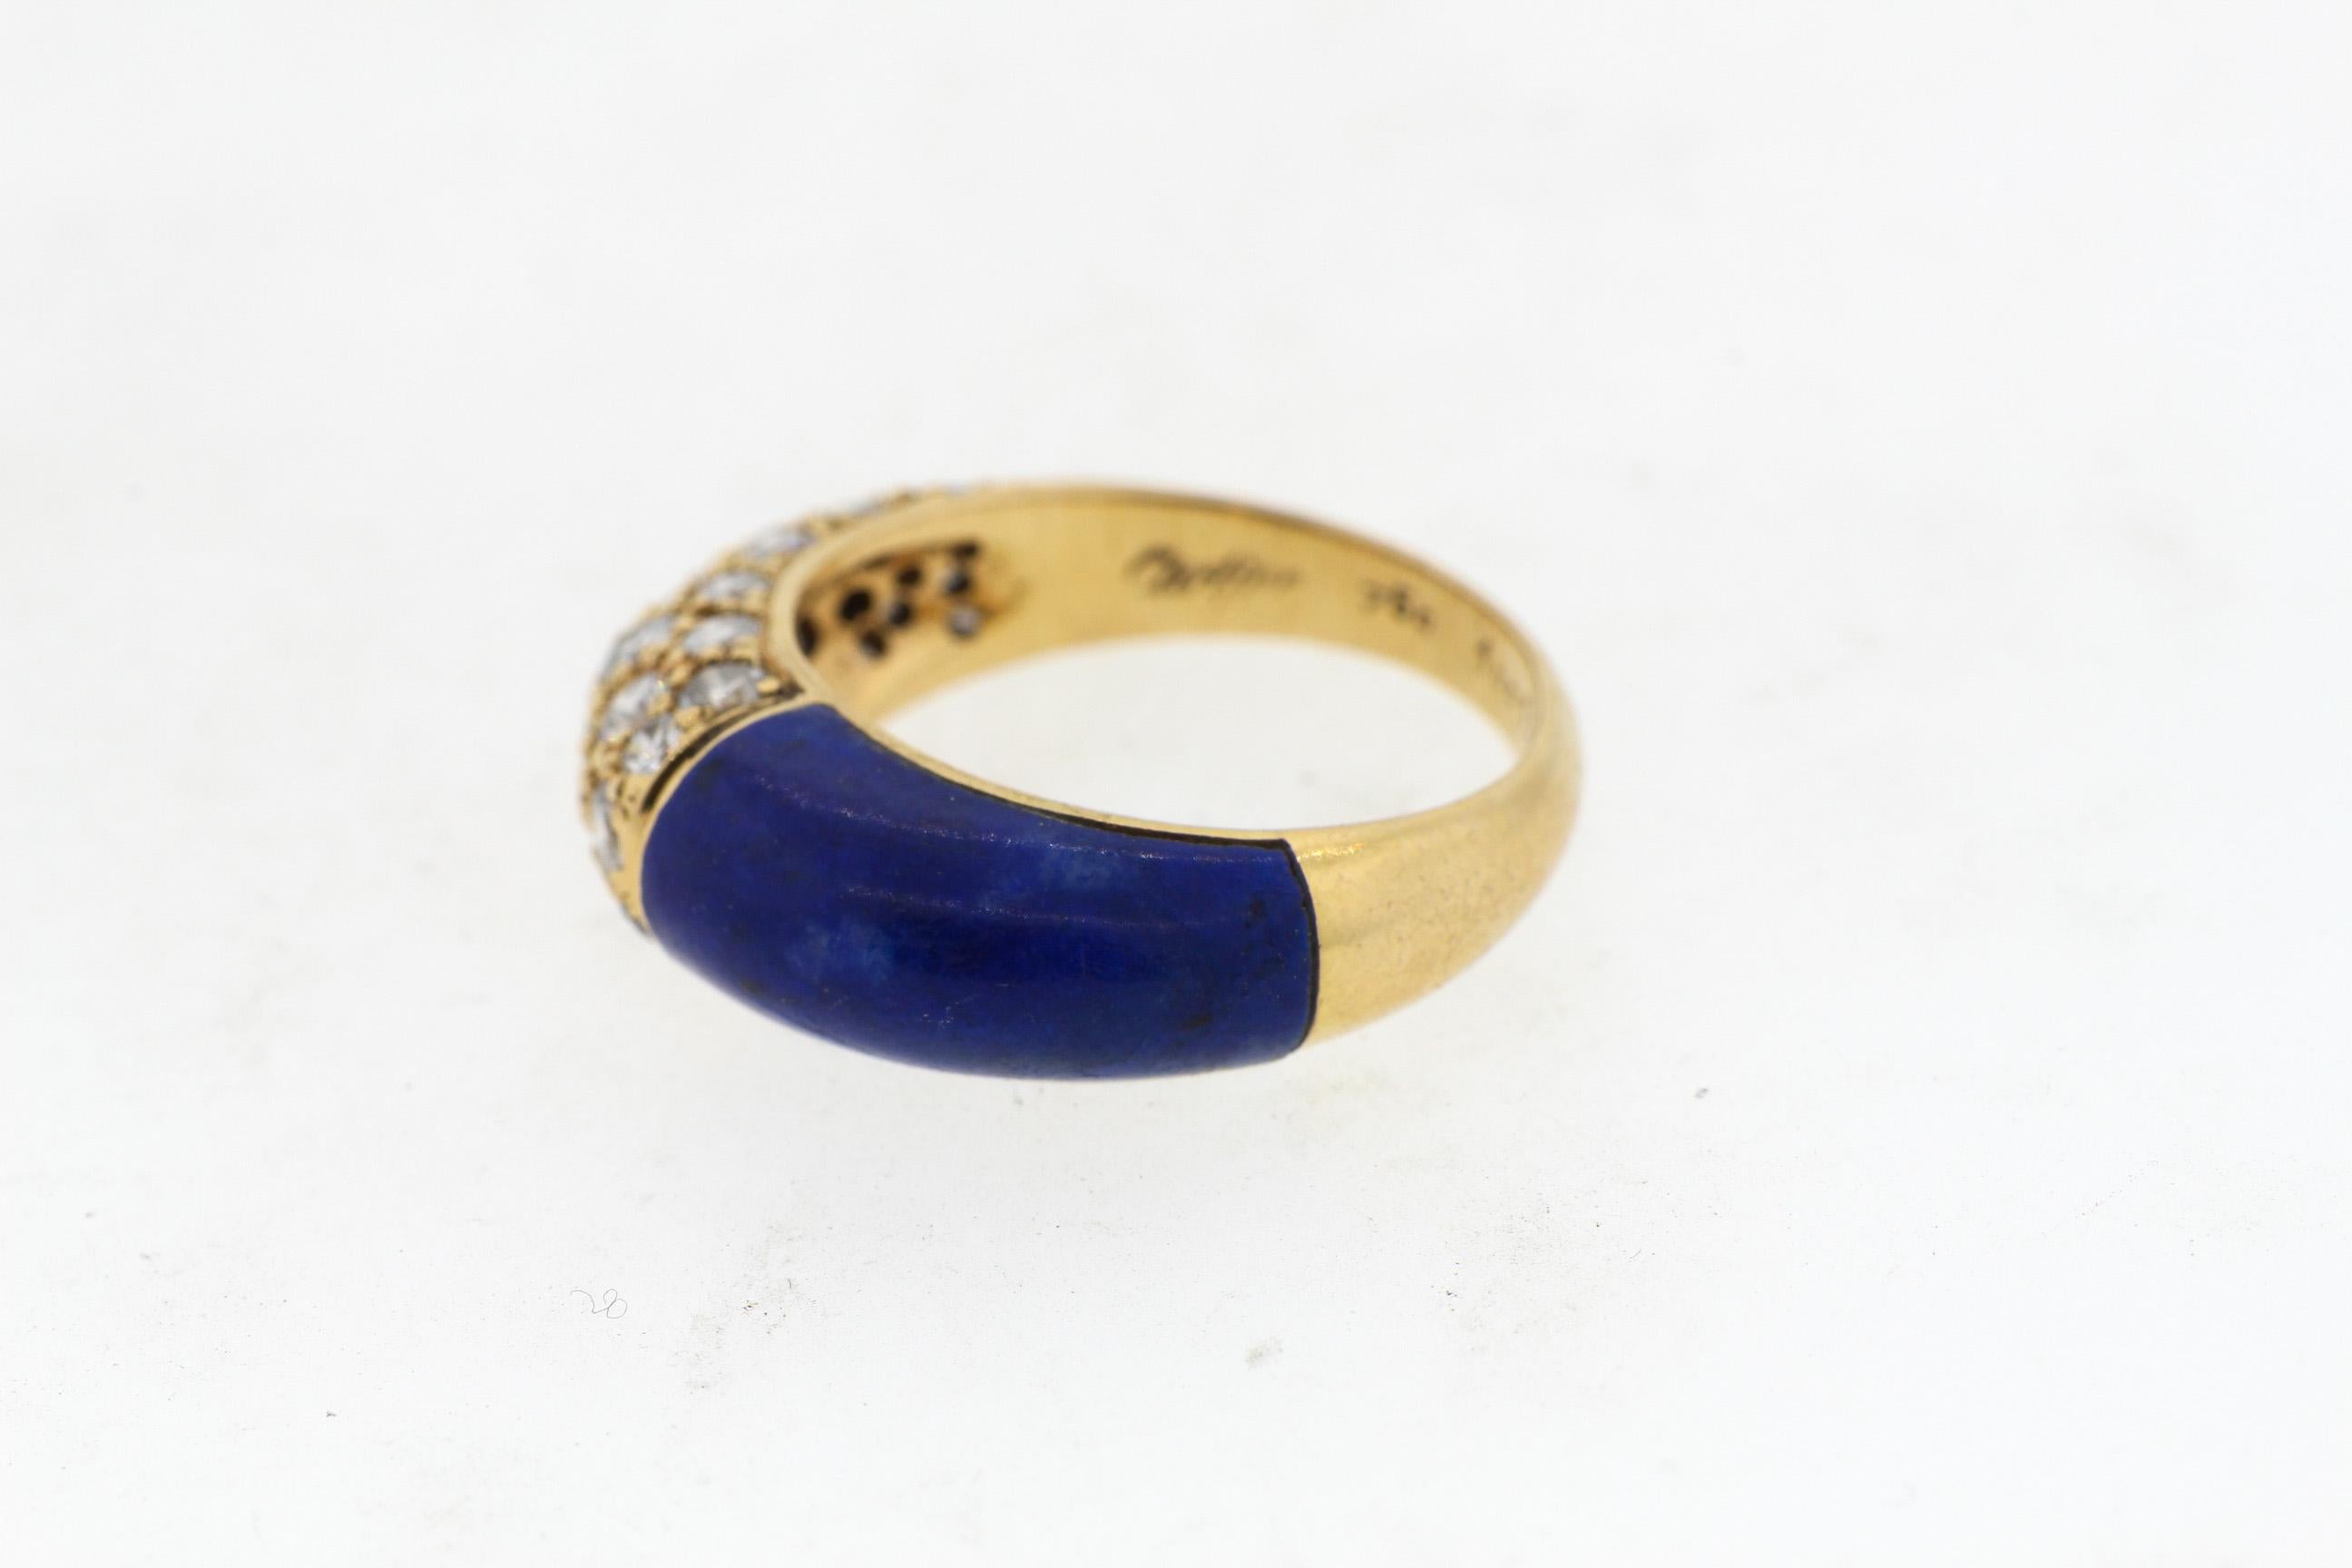 Vintage 18k gold lapis and diamond ring by Cartier circa 1970. The lapis and the diamonds oppose each other on the finger. One side is set with 30 modern round brilliant diamonds weighing about 1.10 cts total. The ring is slightly domed and would